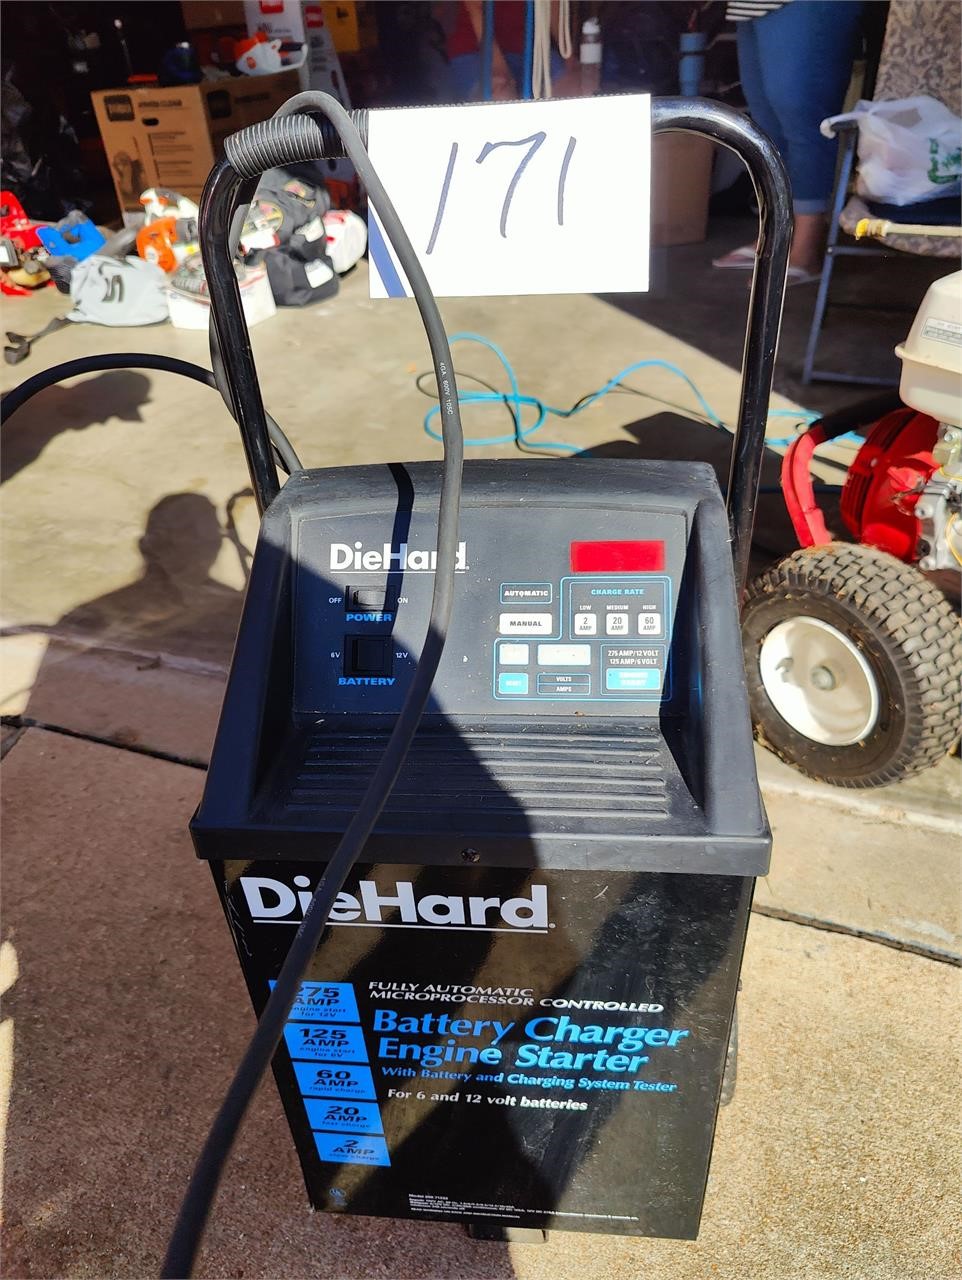 Die Hard battery charger